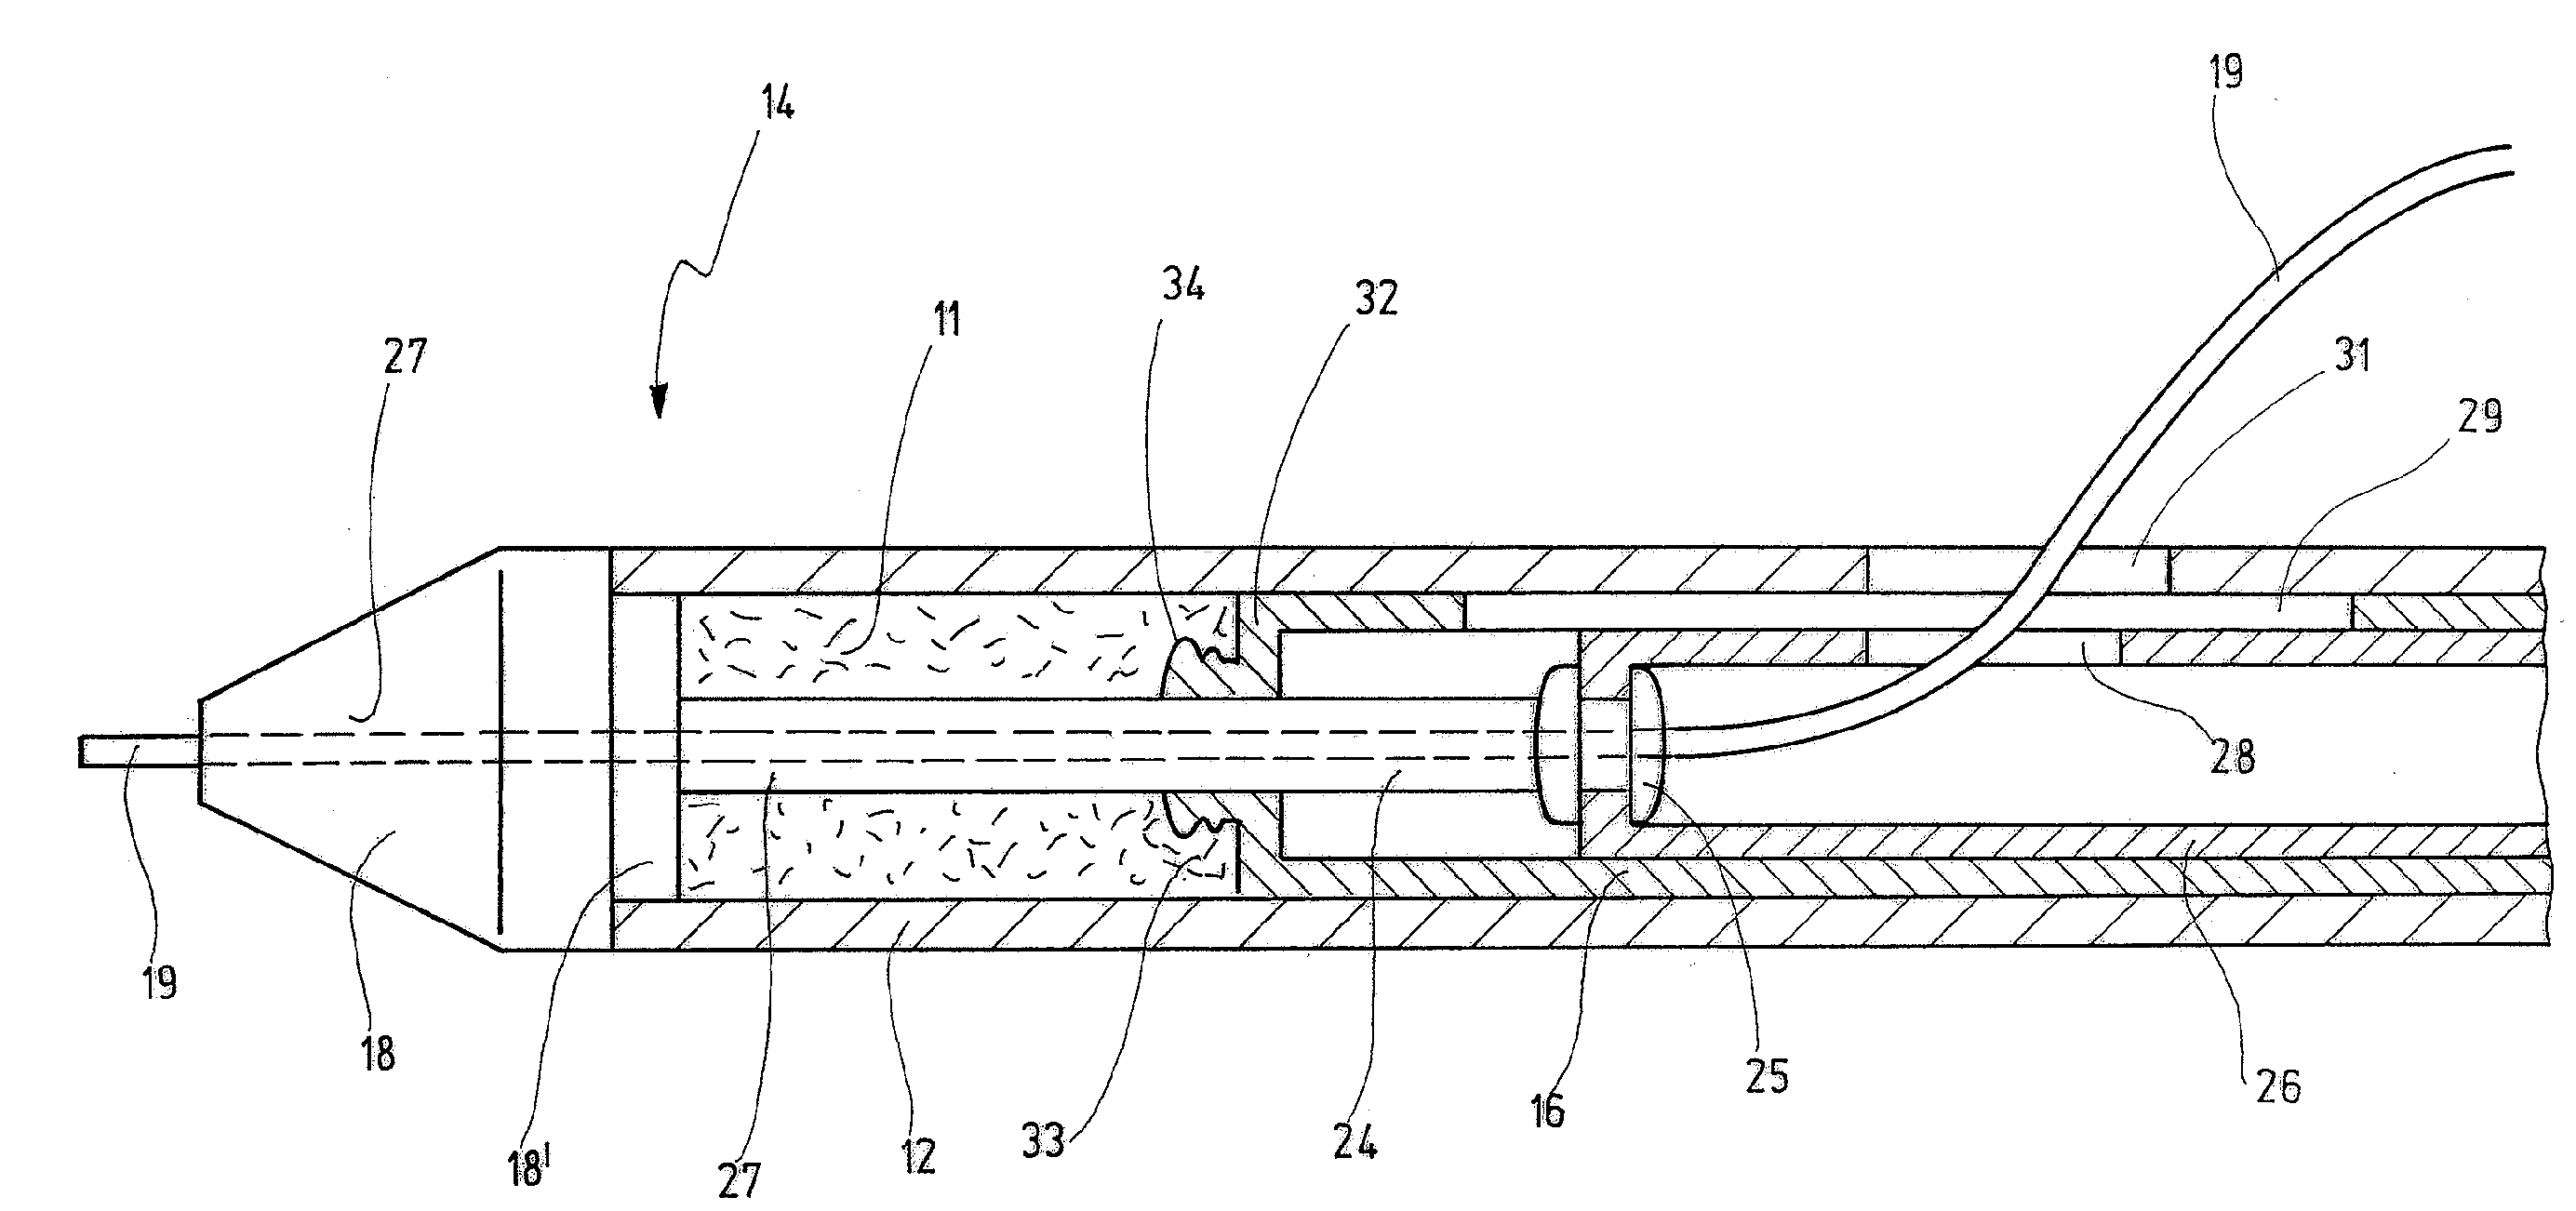 Delivery system having a self-expanding braided stent